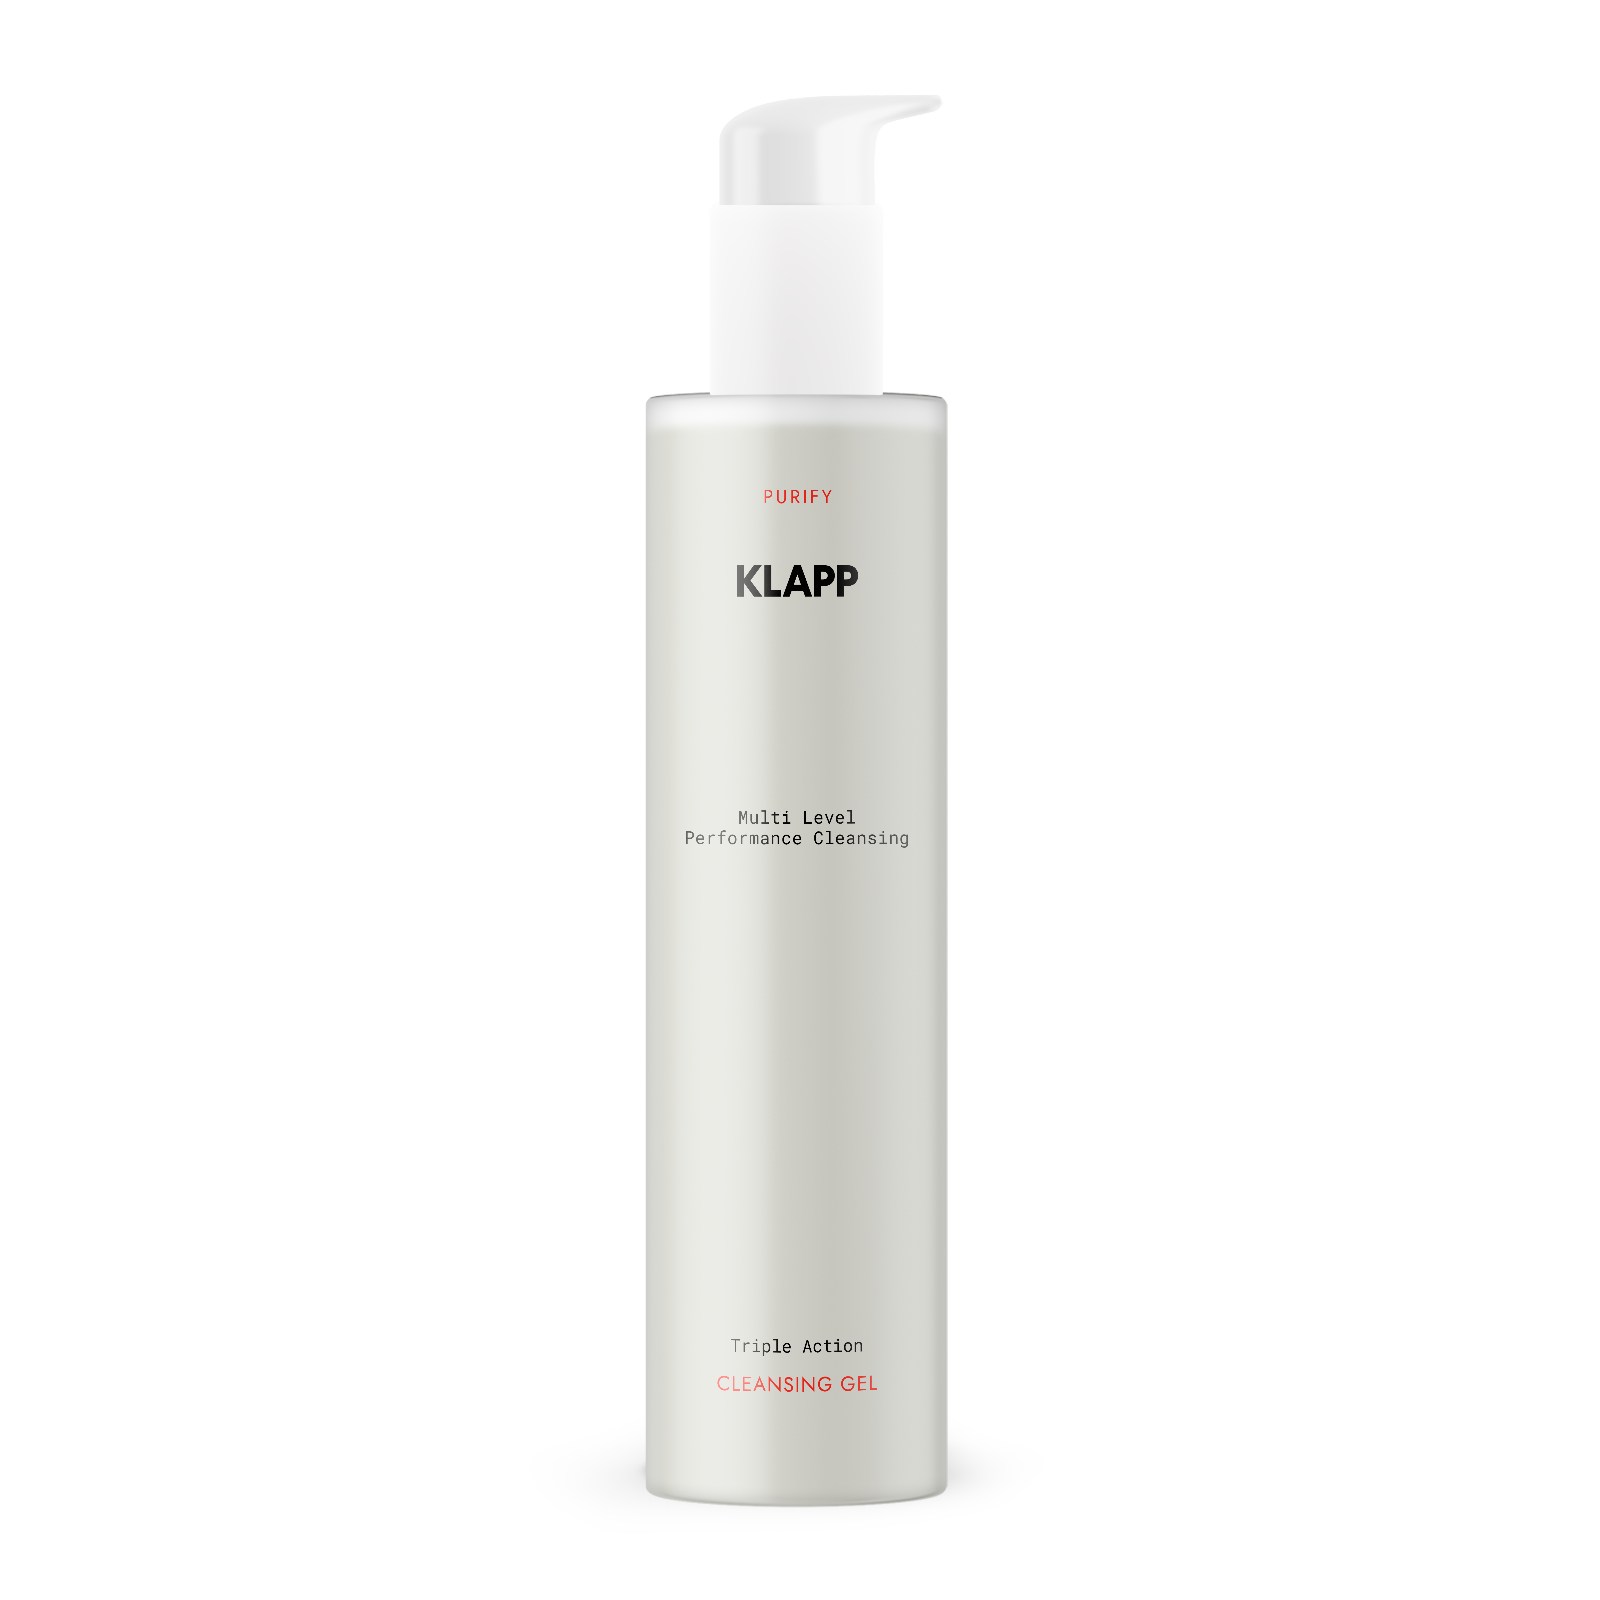 Triple Action Cleansing Gel 200 ml – MULTI LEVEL PERFORMANCE CLEANSING